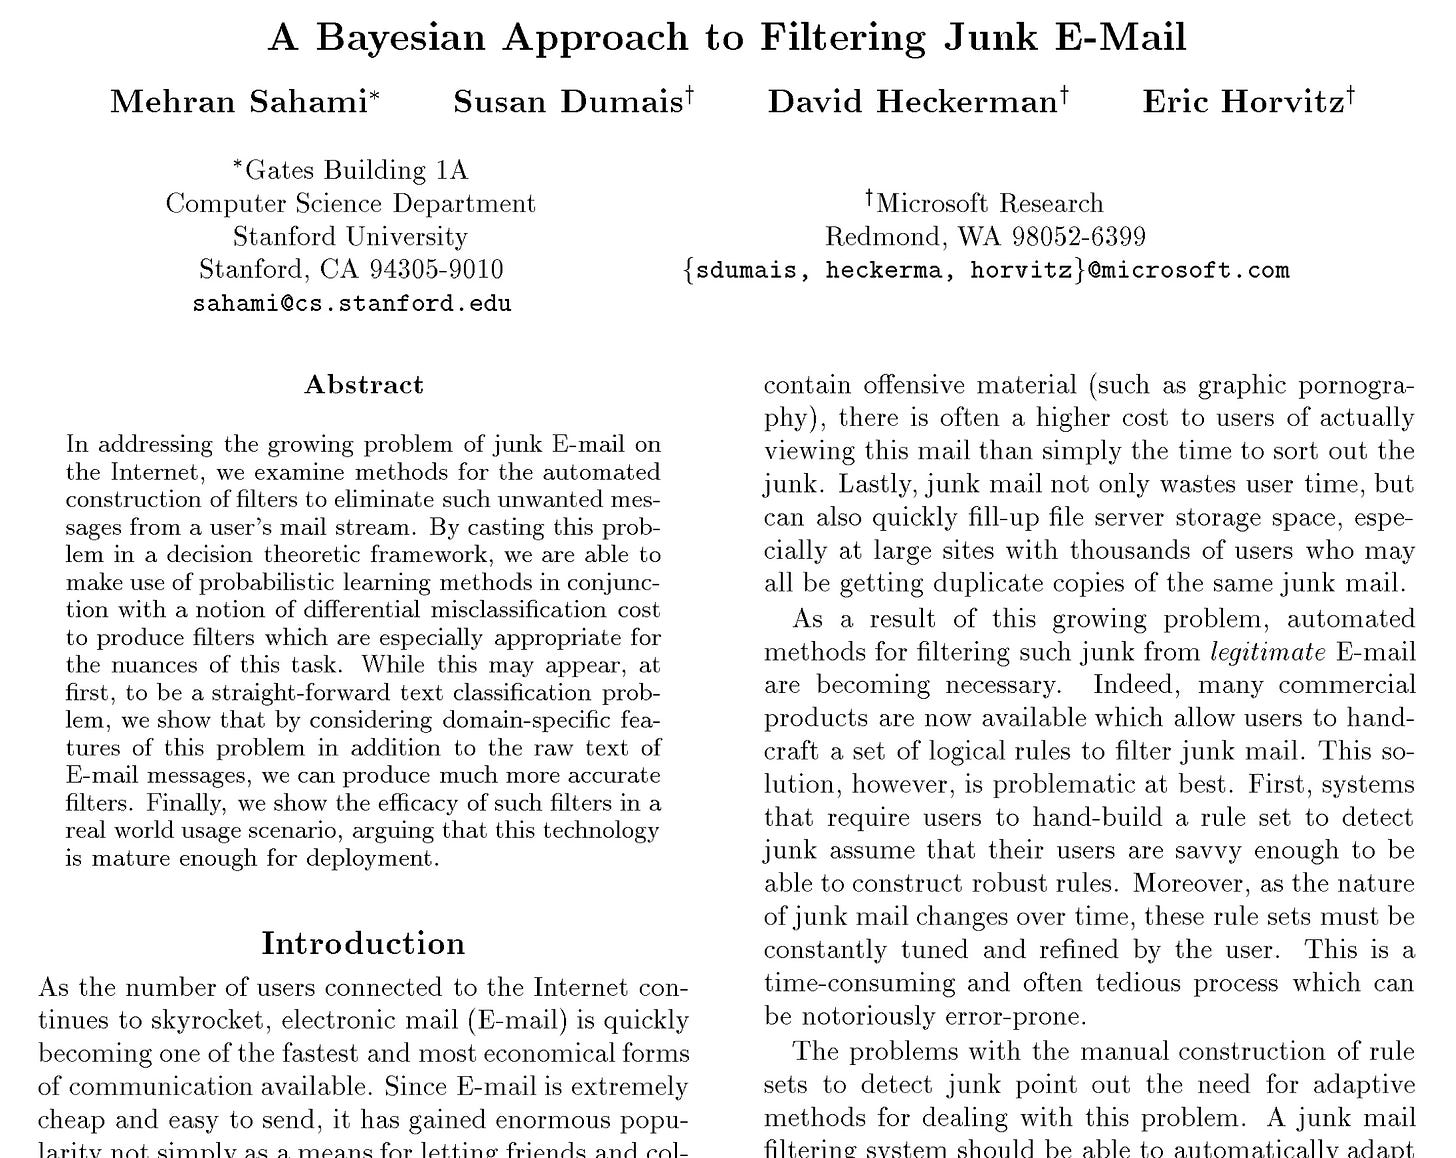 A Bayesian Approach to Filtering Junk E-Mail Mehran Sahami* Susan Dumaist David Heckermant Eric Horvitzt *Gates Building 1A Computer Science Department Stanford University Stanford. CA 94305-9010 sahami@cs.stanford.edu †Microsoft Research Redmond, WA 98052-6399 {sdumais, heckerma, horvitz/@microsoft.com Abstract In addressing the growing problem of junk E-mail on the Internet, we examine methods for the automated construction of filters to eliminate such unwanted mes- sages from a user's mail stream. By casting this prob- lem in a decision theoretic framework, we are able to make use of probabilistic learning methods in conjunc- ton with a notion of differential misclassification cost to produce filters which are especially appropriate for the nuances of this task. While this may appear, at first, to be a straight-forward text classification prob- lem, we show that by considering domain-specific fea- tures of this problem in addition to the raw text of E-mail messages, we can produce much more accurate filters. Finally, we show the efficacy of such filters in a real world usage scenario, arguing that this technology is mature enough for deployment. Introduction As the number of users connected to the Internet con- tinues to skyrocket, electronic mail (E-mail) is quickly becoming one of the fastest and most economical forms of communication available. Since E-mail is extremely cheap and easy to send, it has gained enormous popu- larity not dimnuad a mornafor otti no frienda and onl contain offensive material (such as graphic pornogra- phy), there is often a higher cost to users of actually viewing this mail than simply the time to sort out the junk. Lastly, junk mail not only wastes user time, but can also quickly fill-up file server storage space, espe- cially at large sites with thousands of users who may all be getting duplicate copies of the same junk mail. As a result of this growing problem, automated methods for filtering such junk from legitimate E-mail are becoming necessary. Indeed, many commercial products are now available which allow users to hand- craft a set of logical rules to filter junk mail. This so- lution, however, is problematic at best. First, systems that require users to hand-build a rule set to detect junk assume that their users are savvy enough to be able to construct robust rules. Moreover, as the nature of junk mail changes over time, these rule sets must be constantly tuned and refined by the user. This is a time-consuming and often tedious process which can be notoriously error-prone. The problems with the manual construction of rule sets to detect junk point out the need for adaptive methods for dealing with this problem. A junk mail filterino sustem should be able to automatically adan